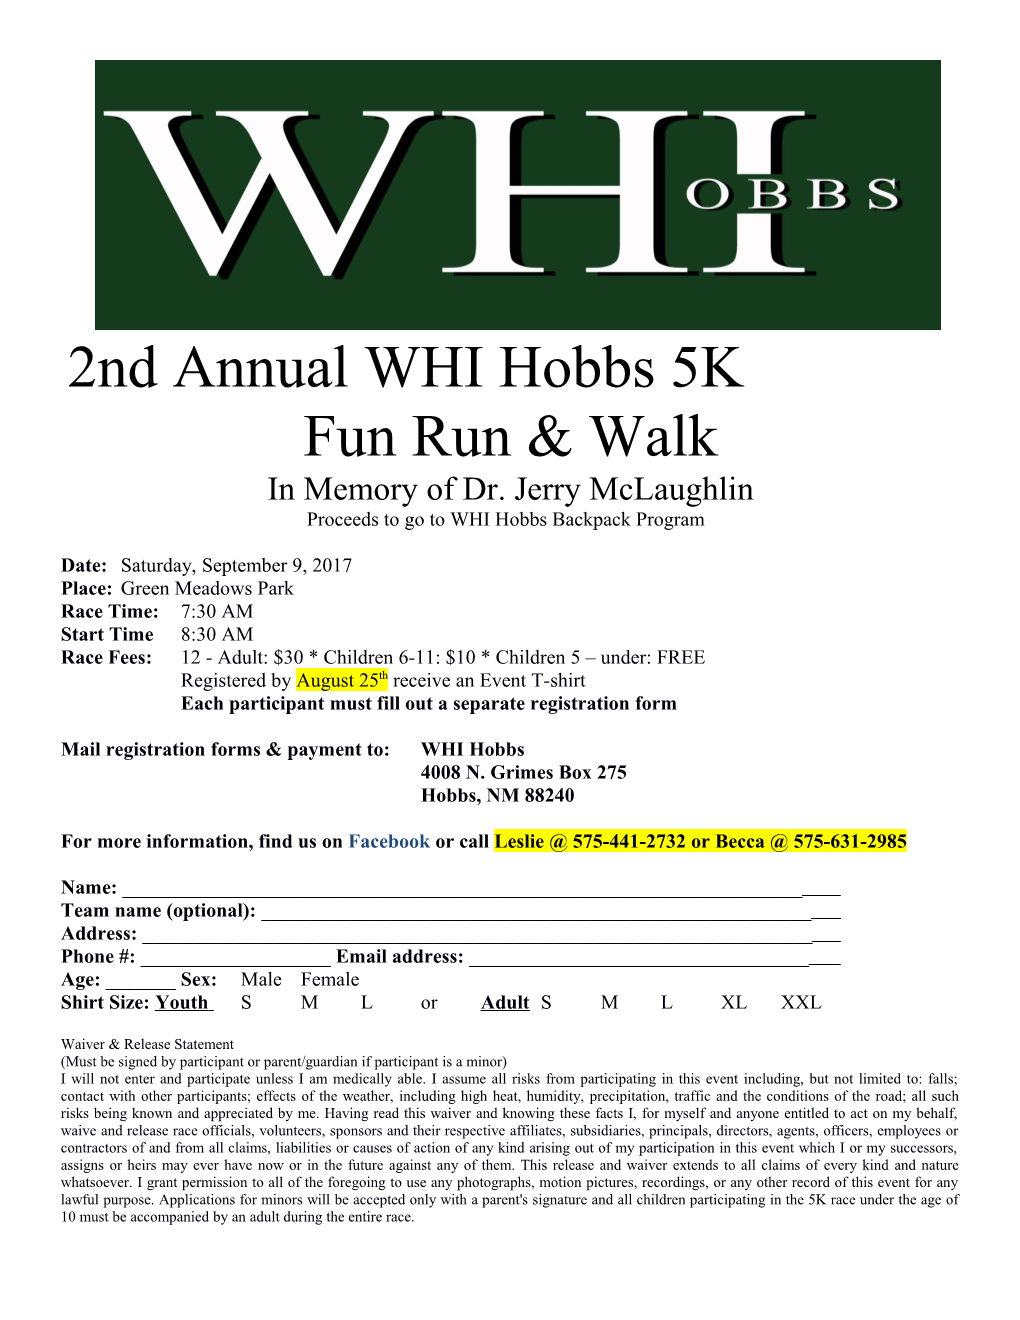 Proceeds to Go to WHI Hobbs Backpack Program